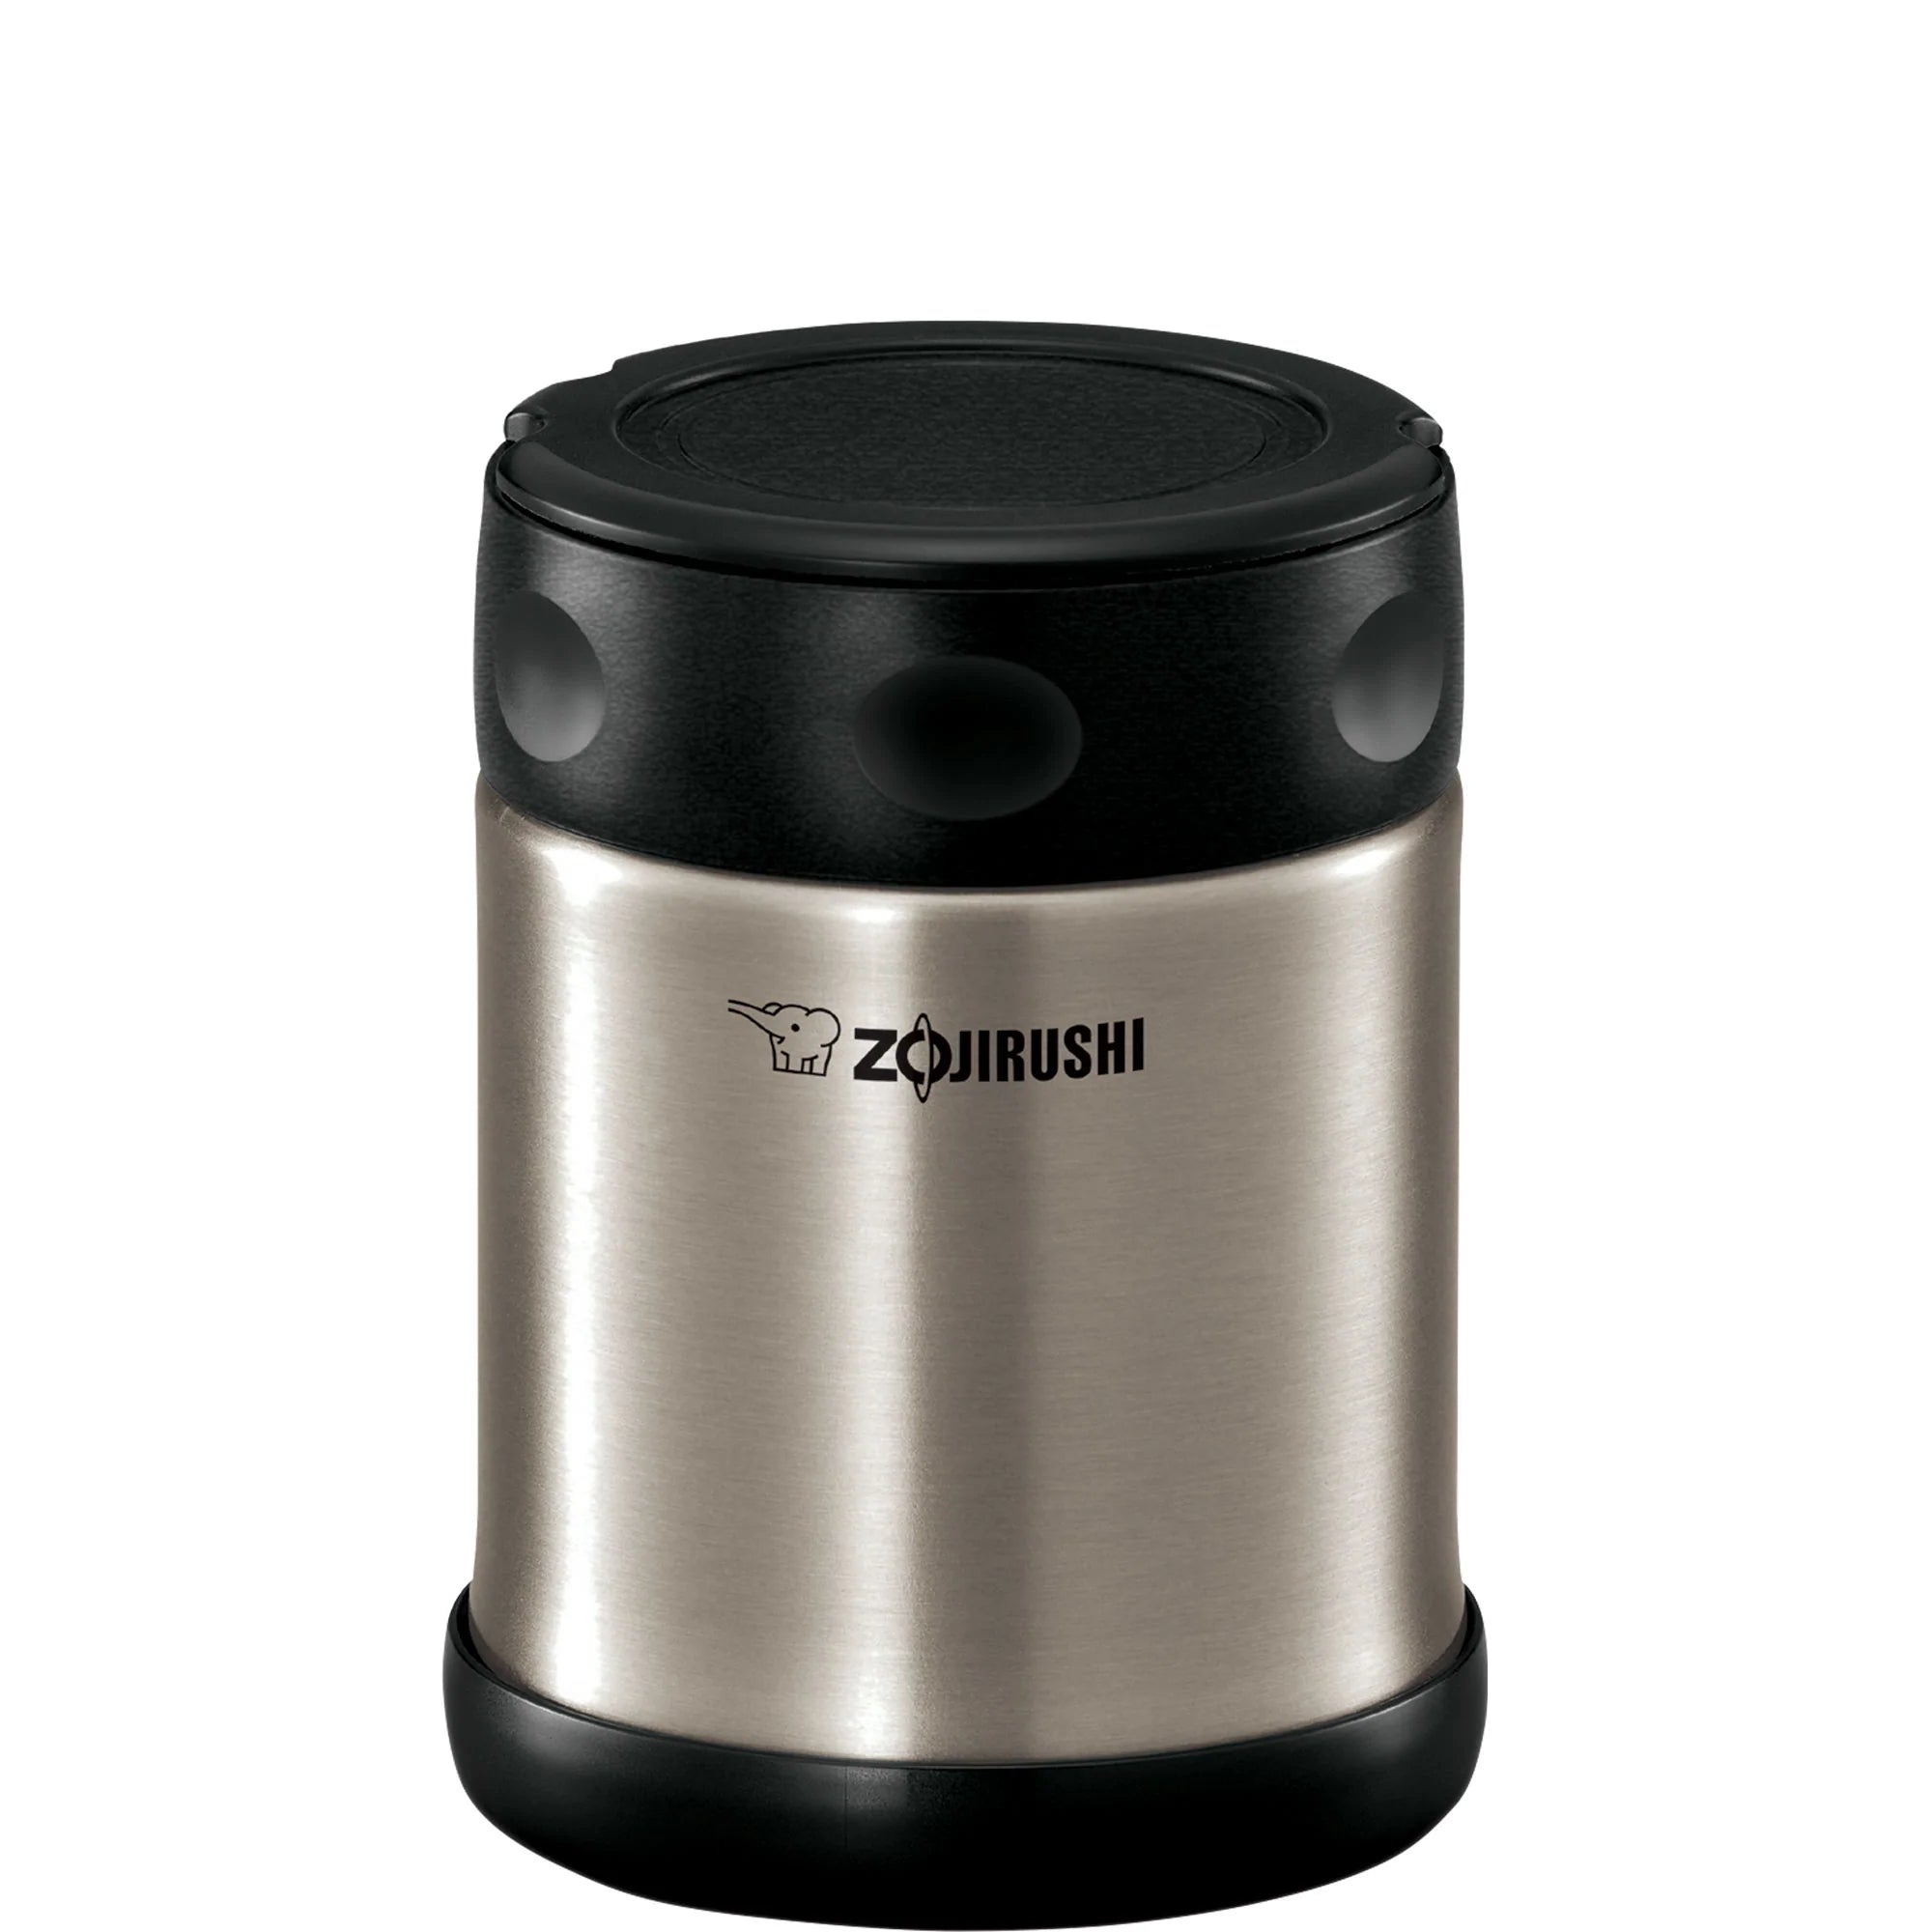 Zojirushi's 16-ounce Stainless Steel Travel Mug is yours from $20